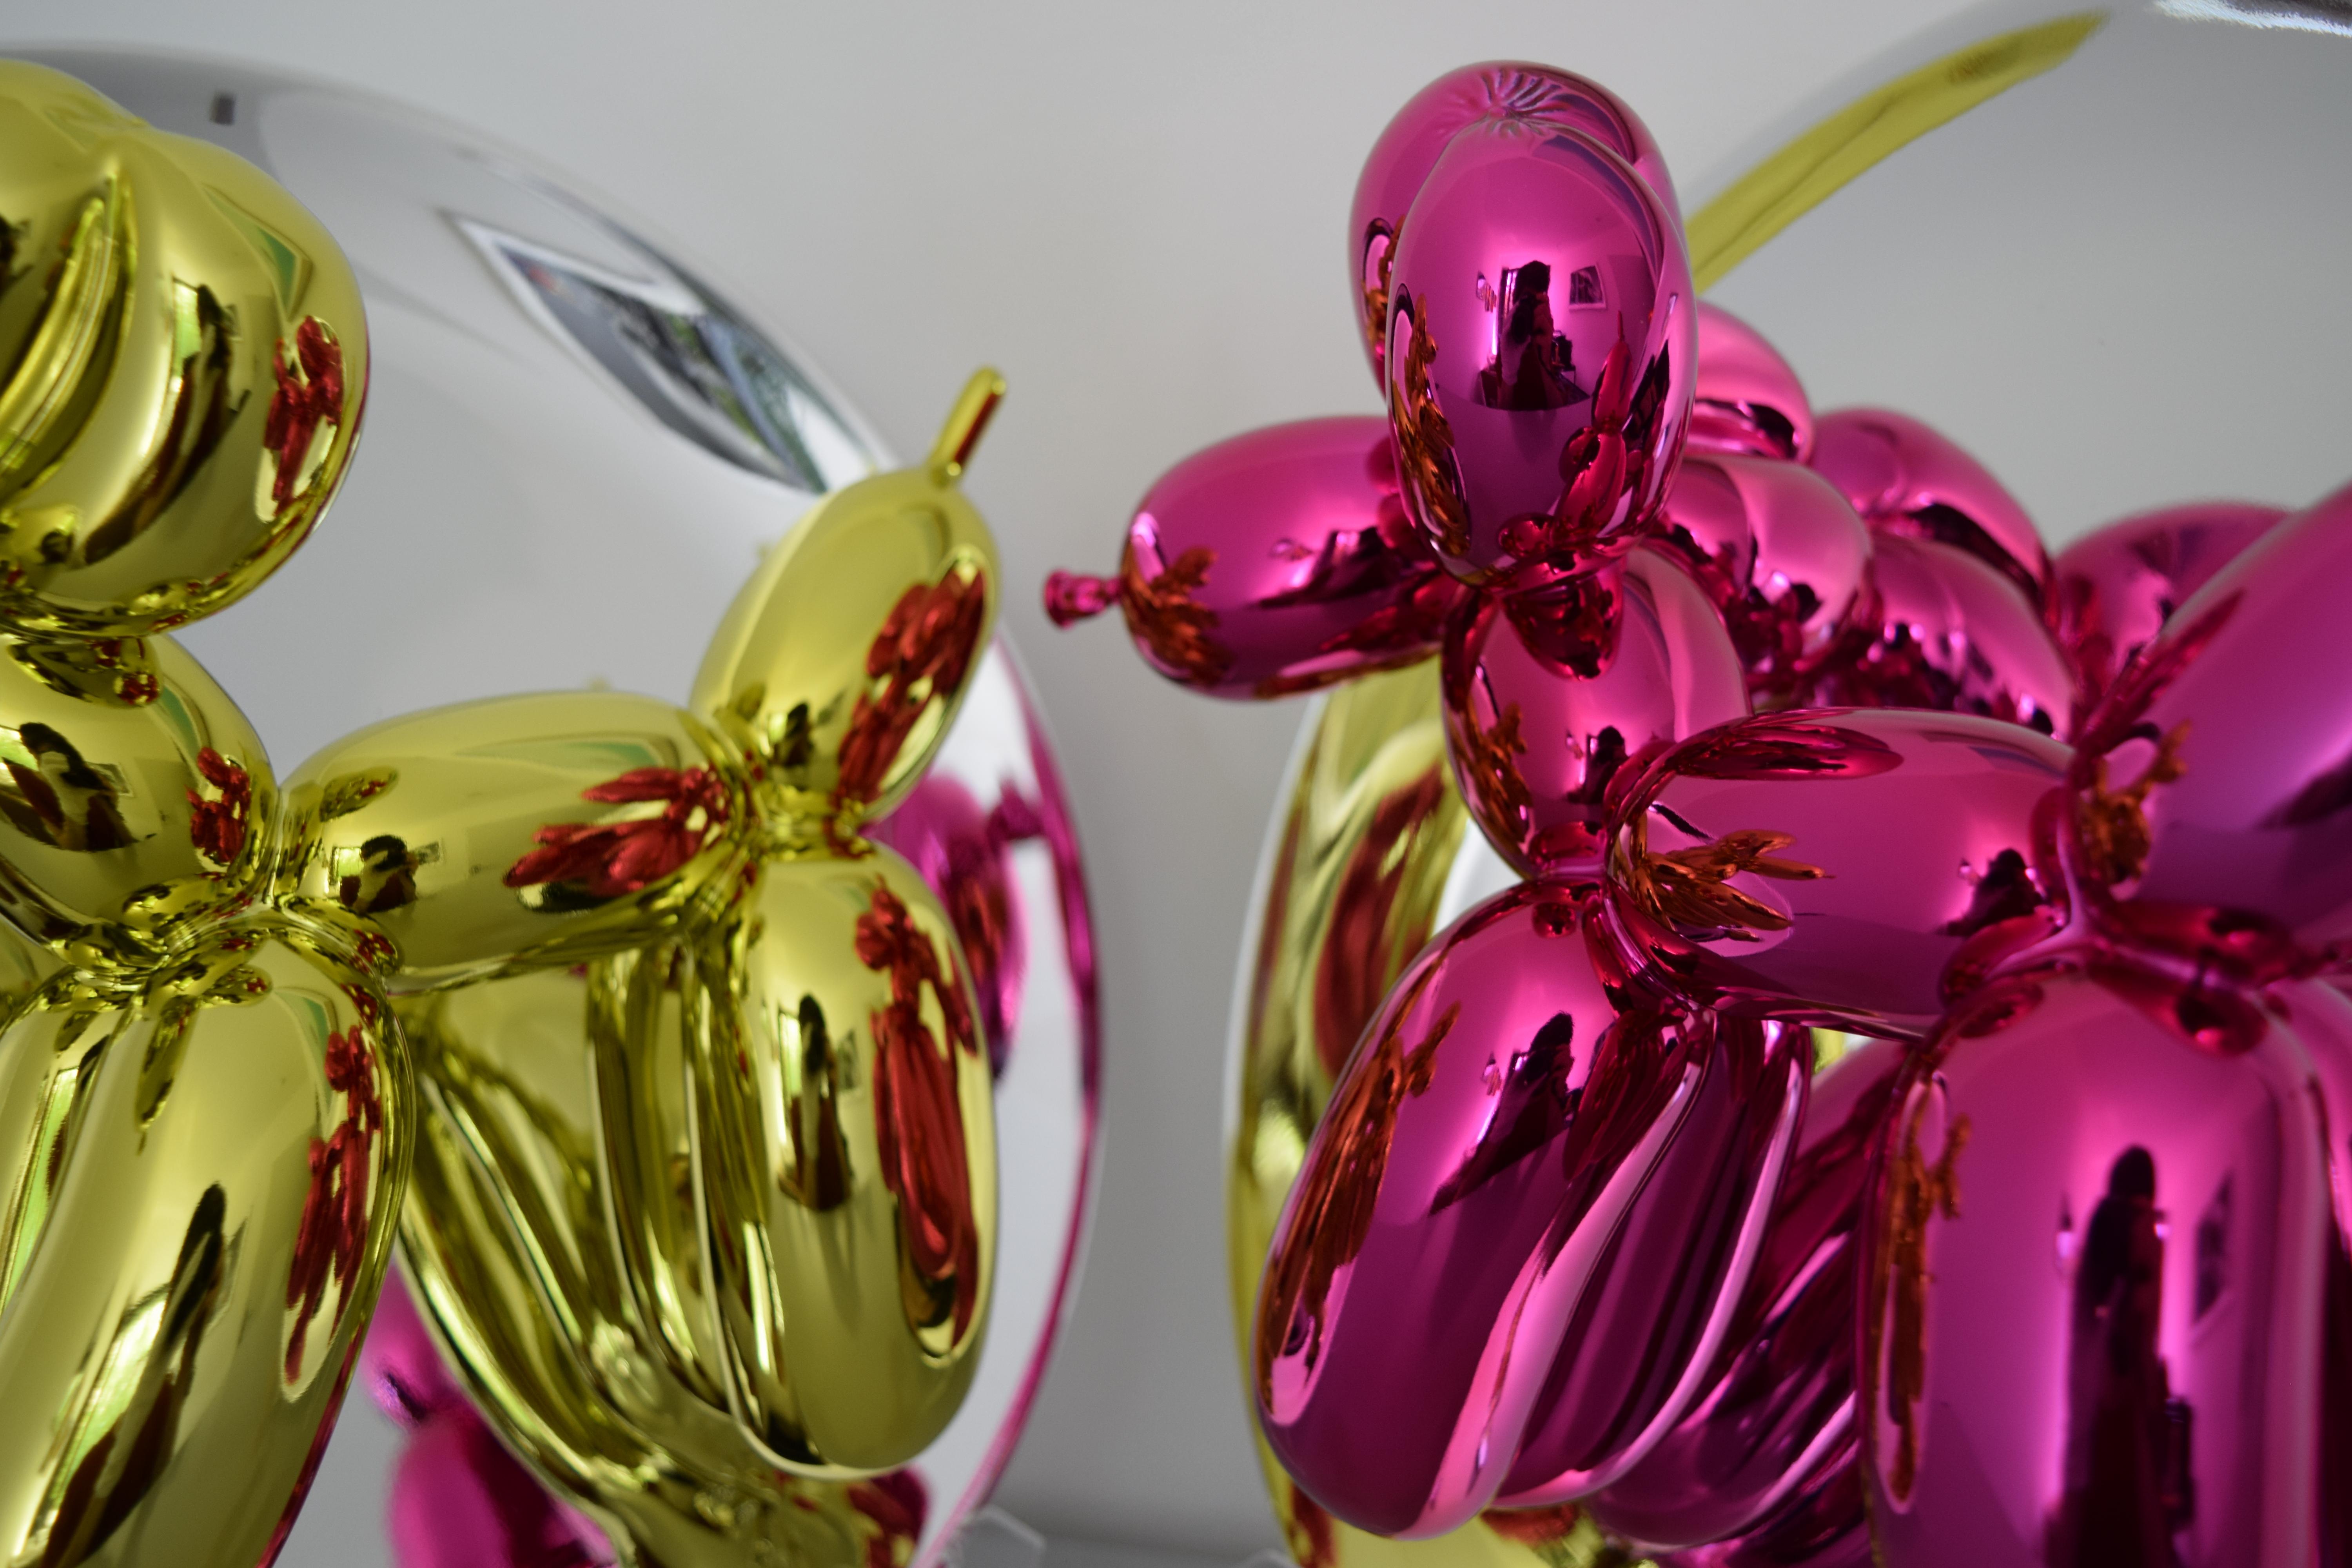 Magenta Balloon Dog Iconic Sculpture by Jeff Koons, Porcelain, Contemporary Art For Sale 13